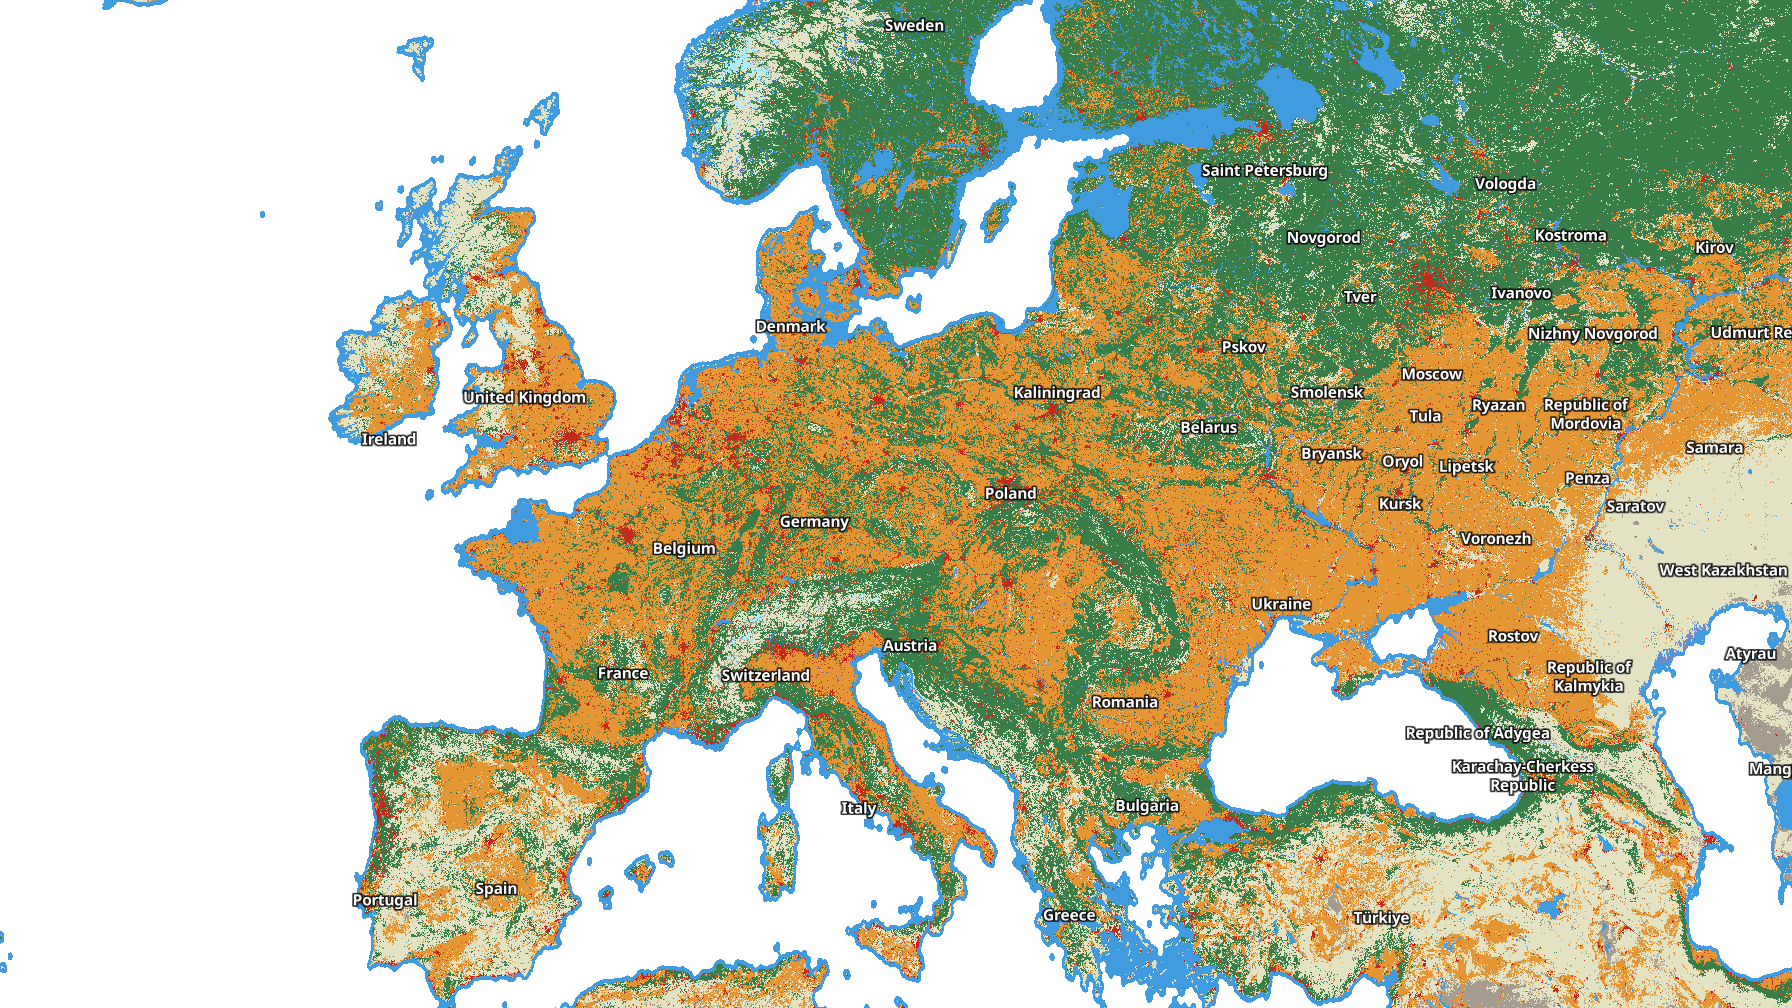 10m Annual Land Use Land Cover Europe